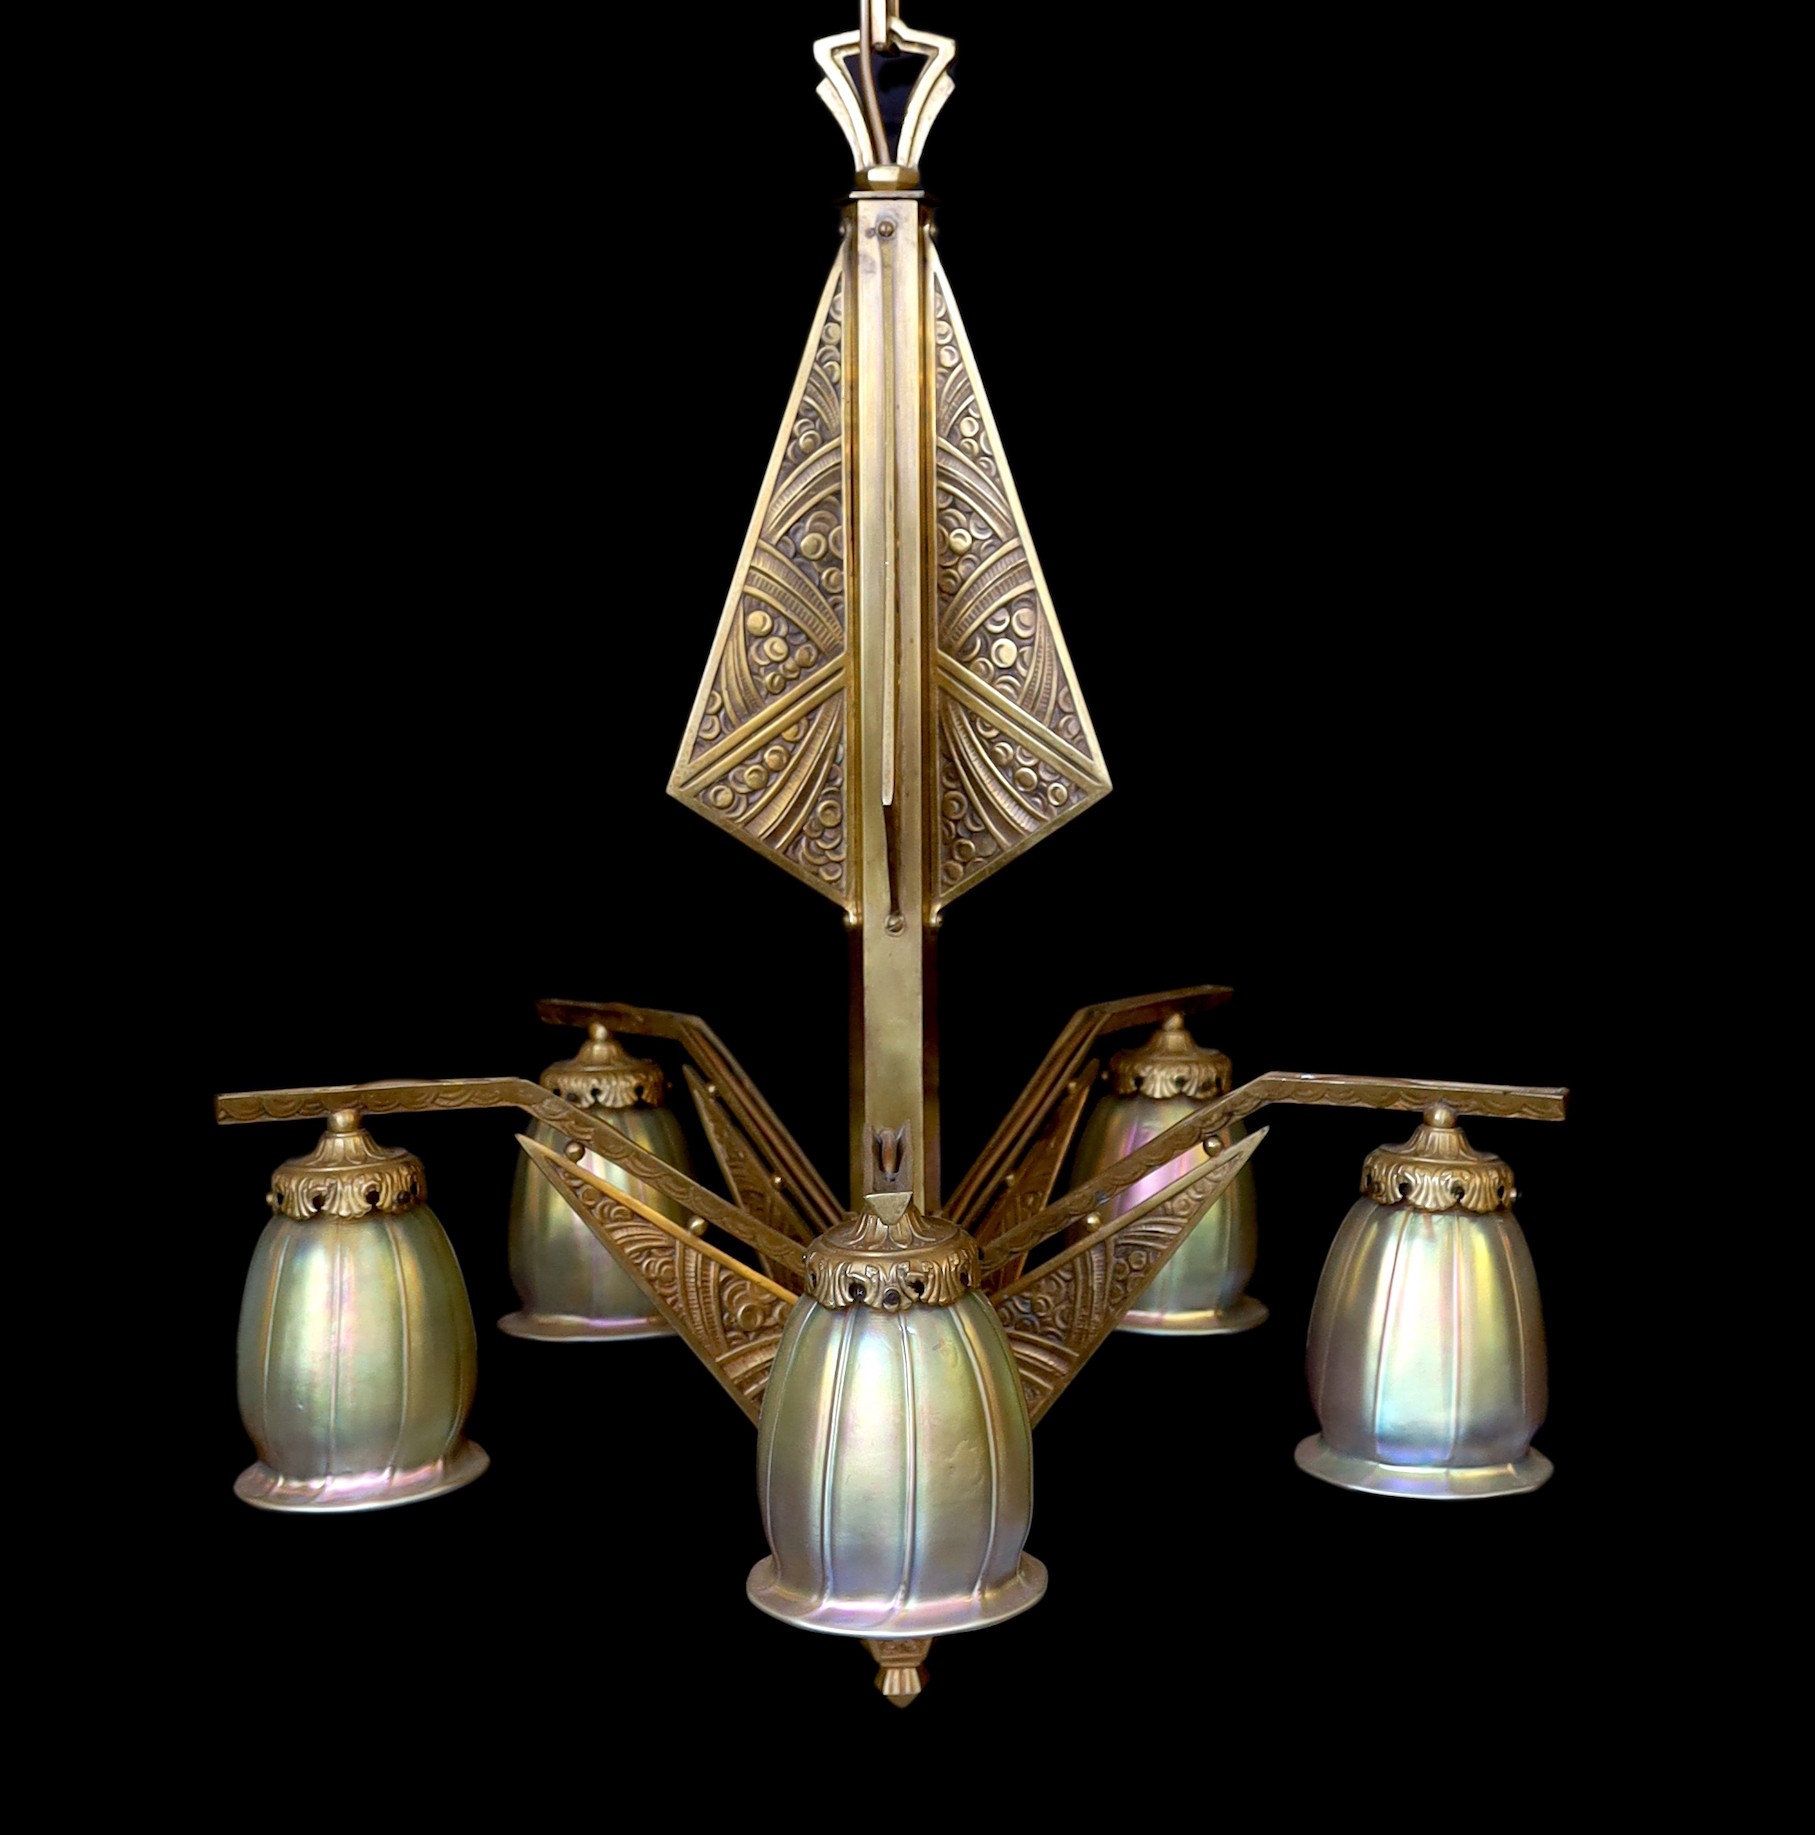 A French Art Deco Valinale de Sevres gilt bronze five light chandelier, of stylish geometric design with iridescent gold tinted glass shades, height 100cm. width 65cm